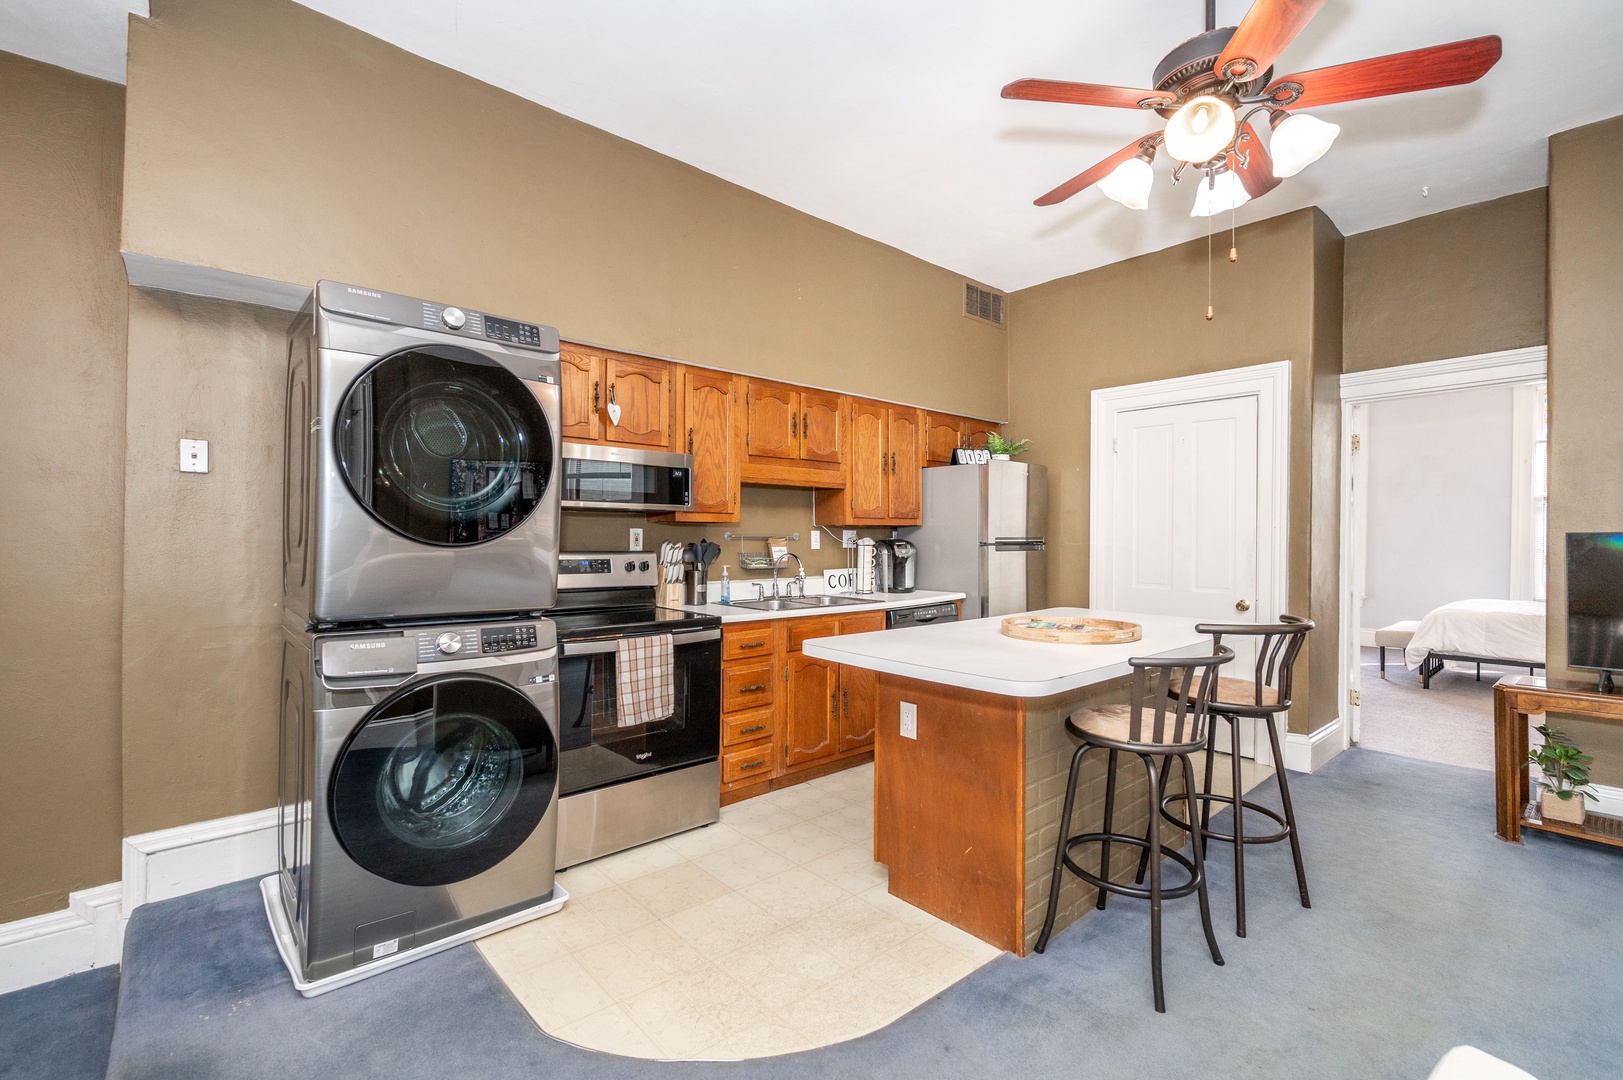 Full kitchen with counter seating, and washer & dryer